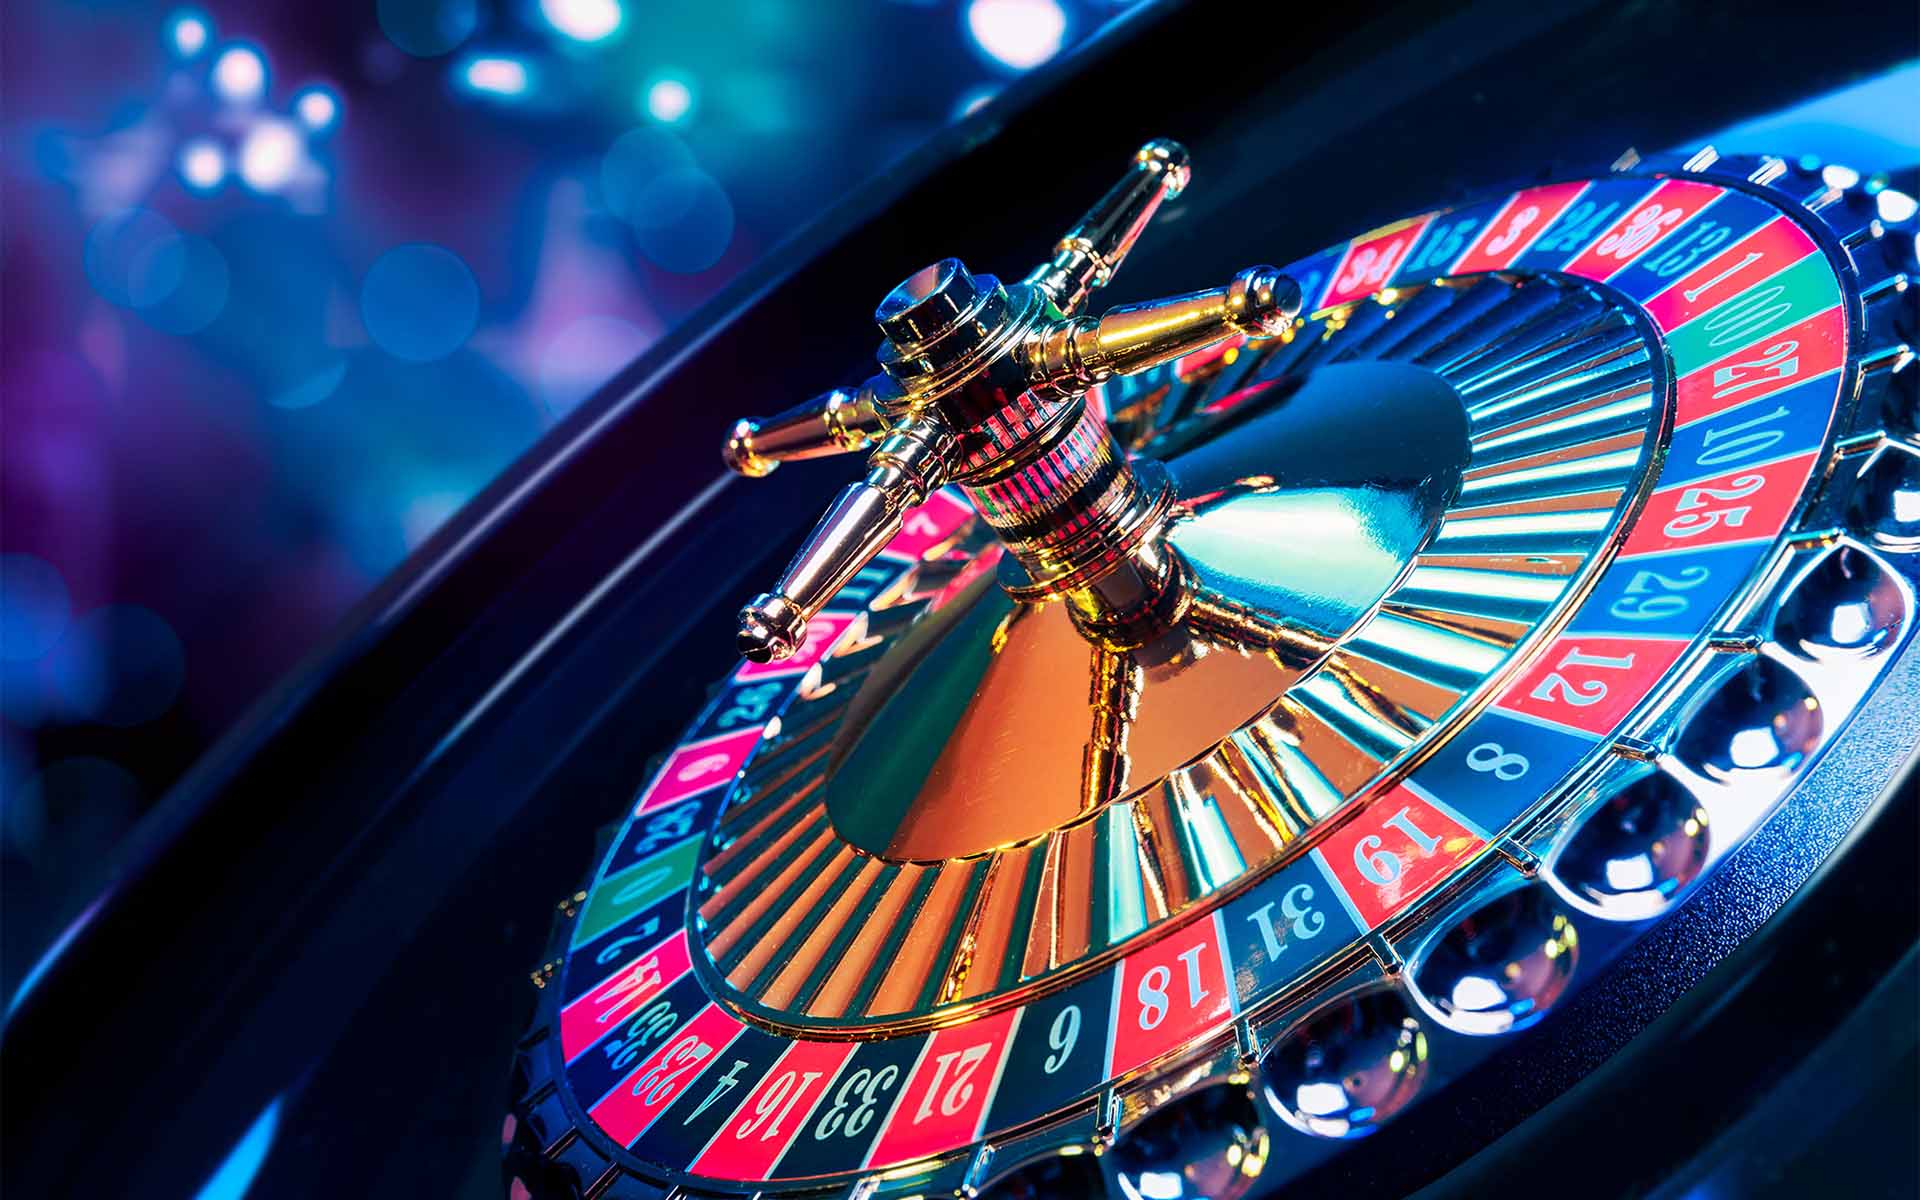 Make a reasonable bet in casino to win